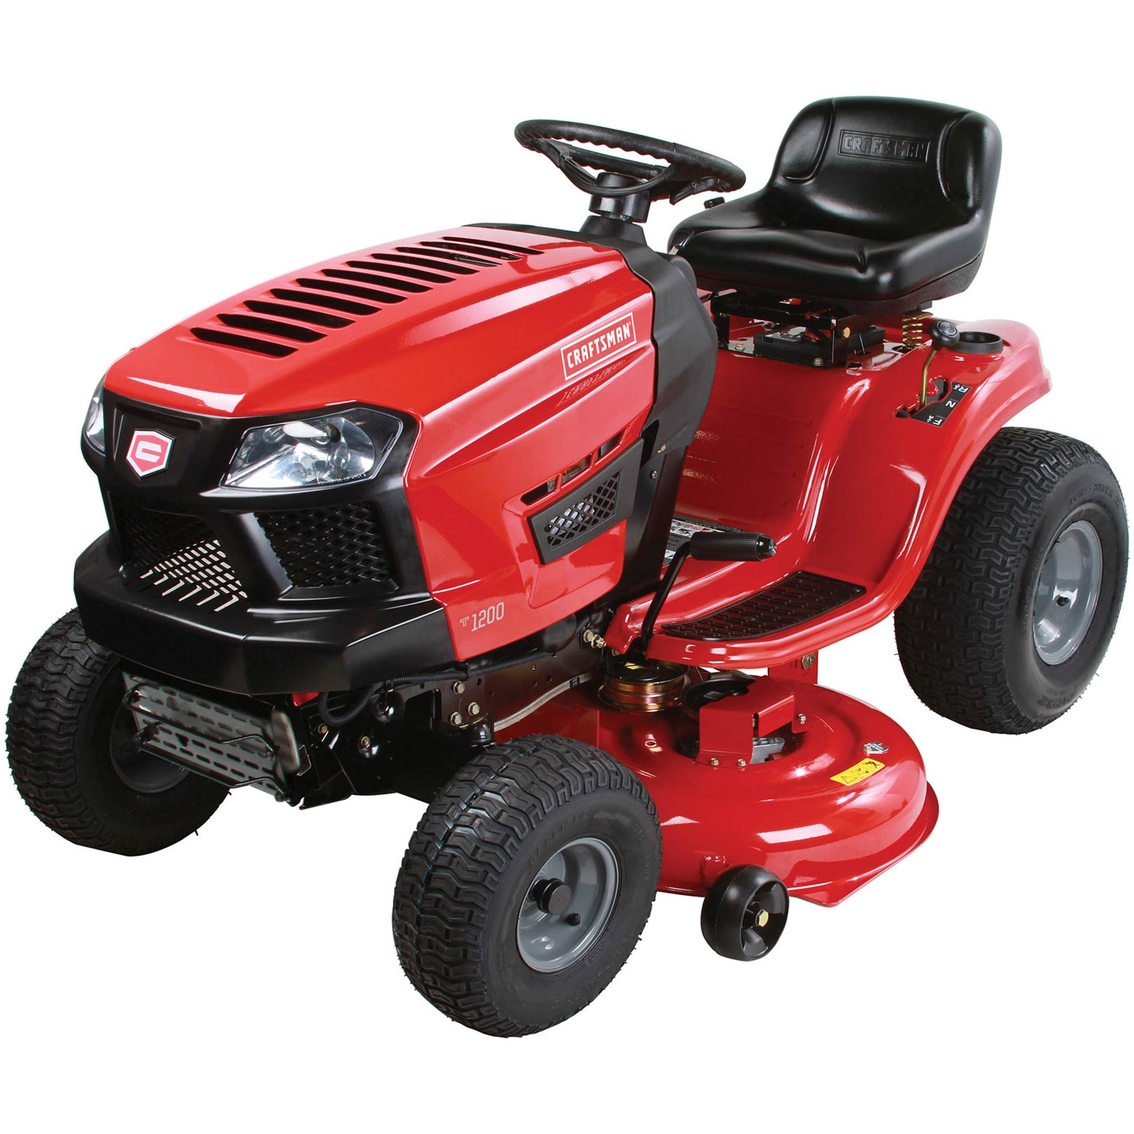 Craftsman 42 420cc Automatic Riding Mower At Craftsman Tractor